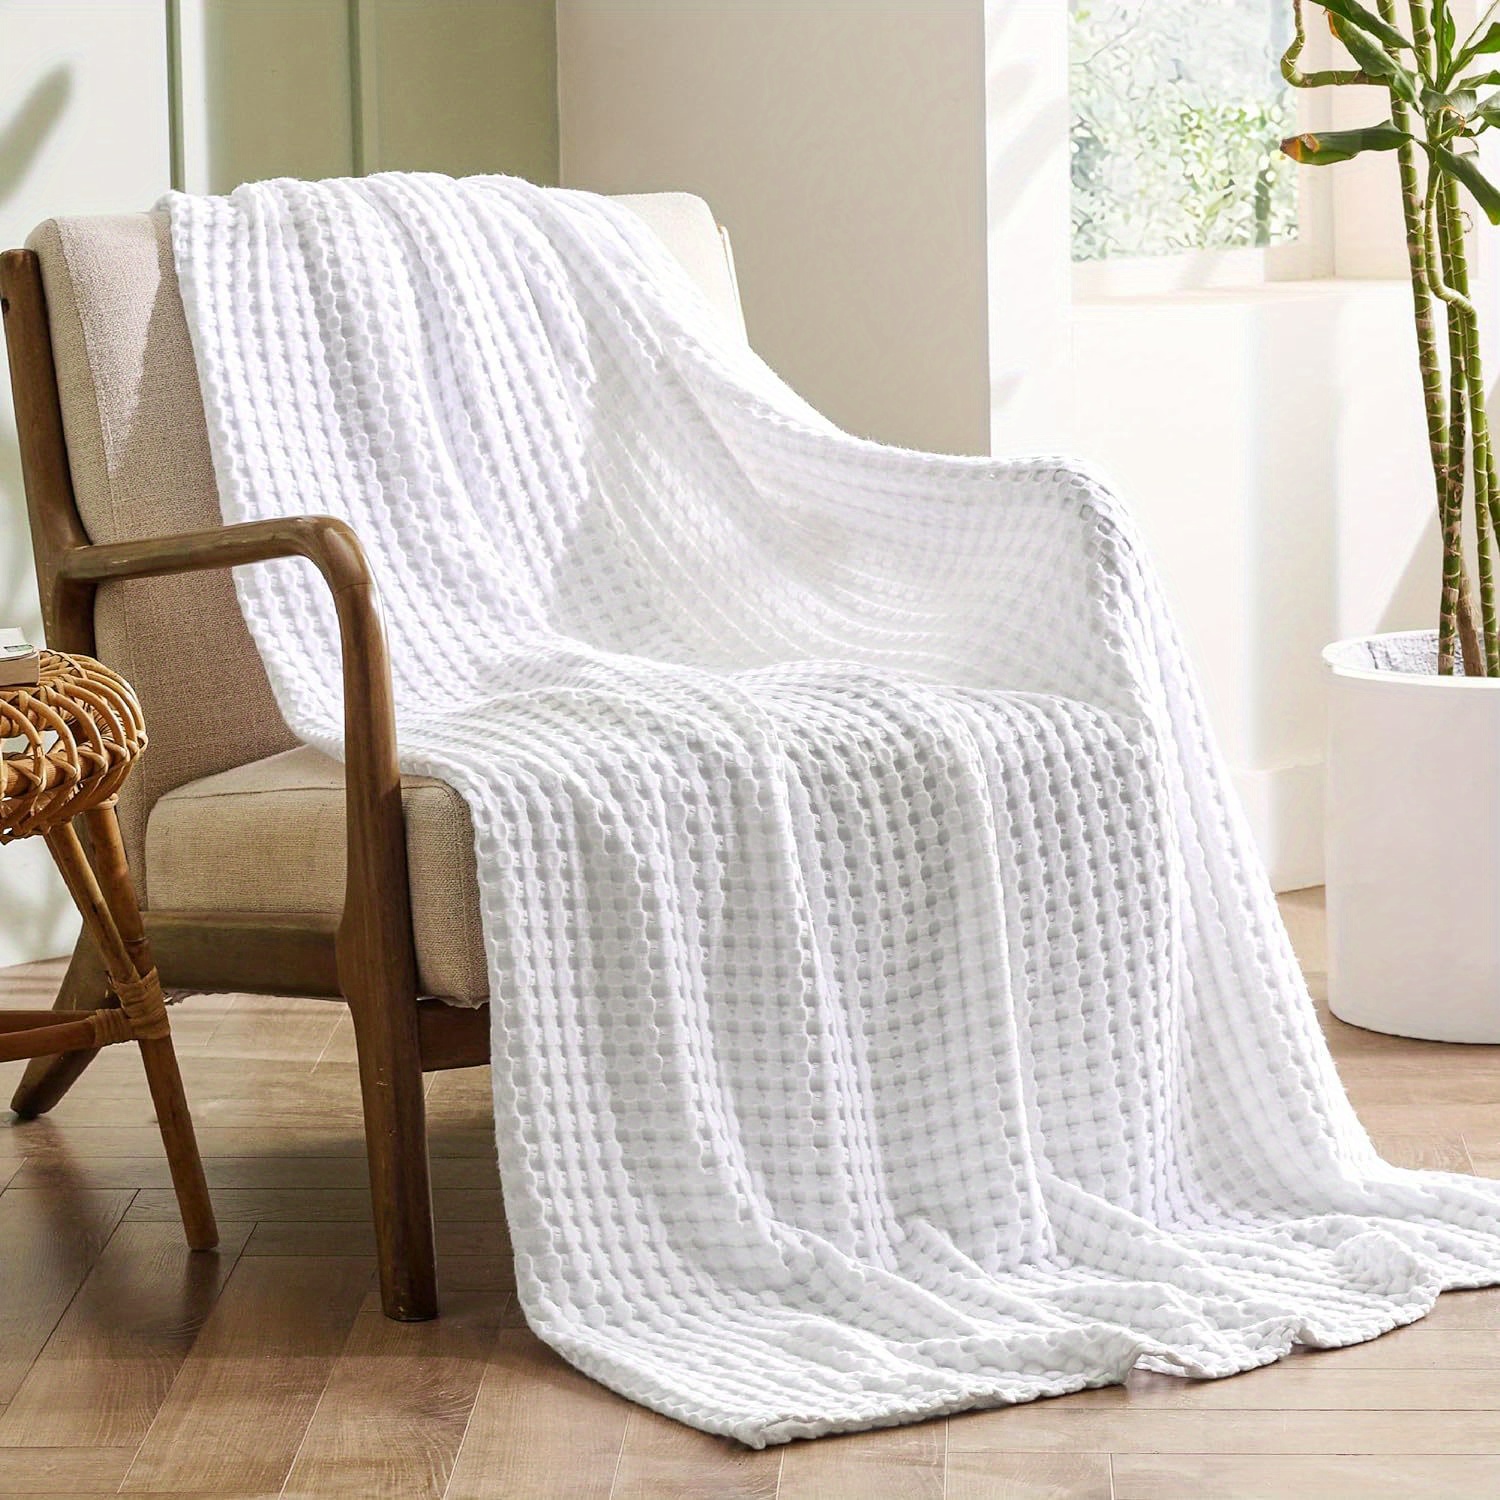 

1pc Cooling Cotton Waffle Blanket - Lightweight Breathable Blanket Of Rayon Derived From Bamboo For Hot Sleepers, Luxury Throws For Bed, Couch And Sofa